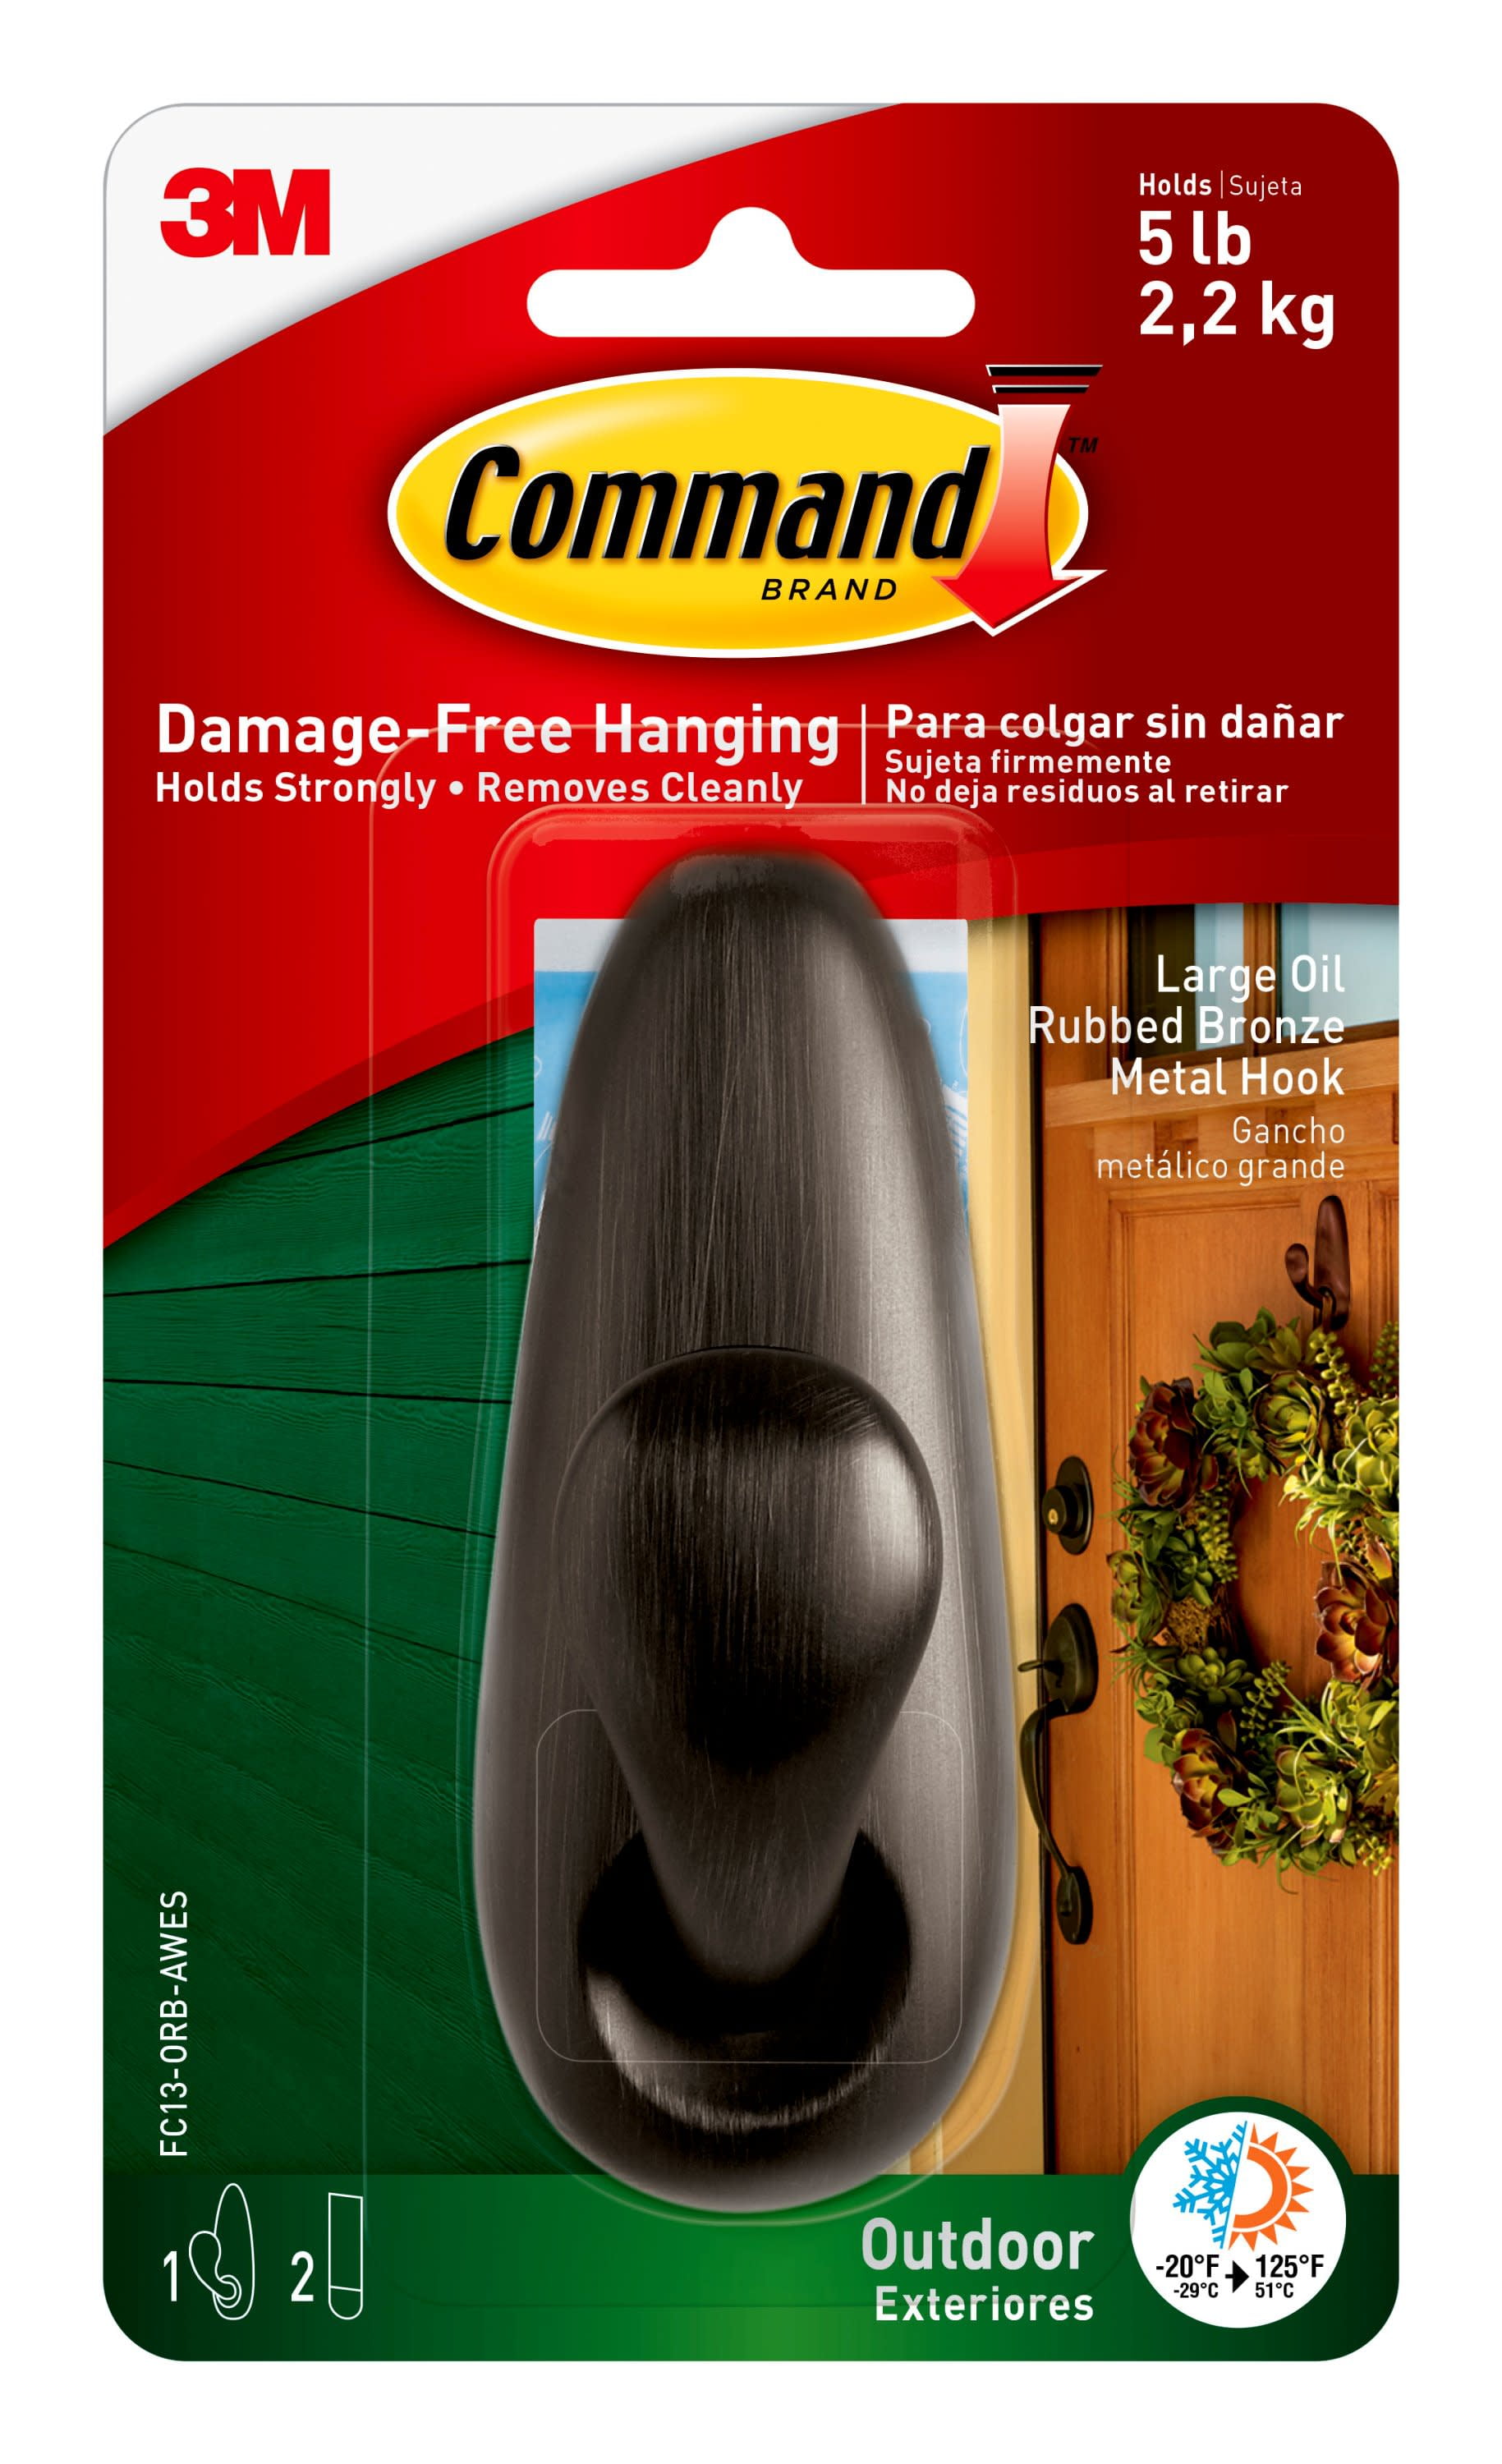 Command Clear Hook with Clear Strips, Large, 1 Hook, 2 Strips/Pack